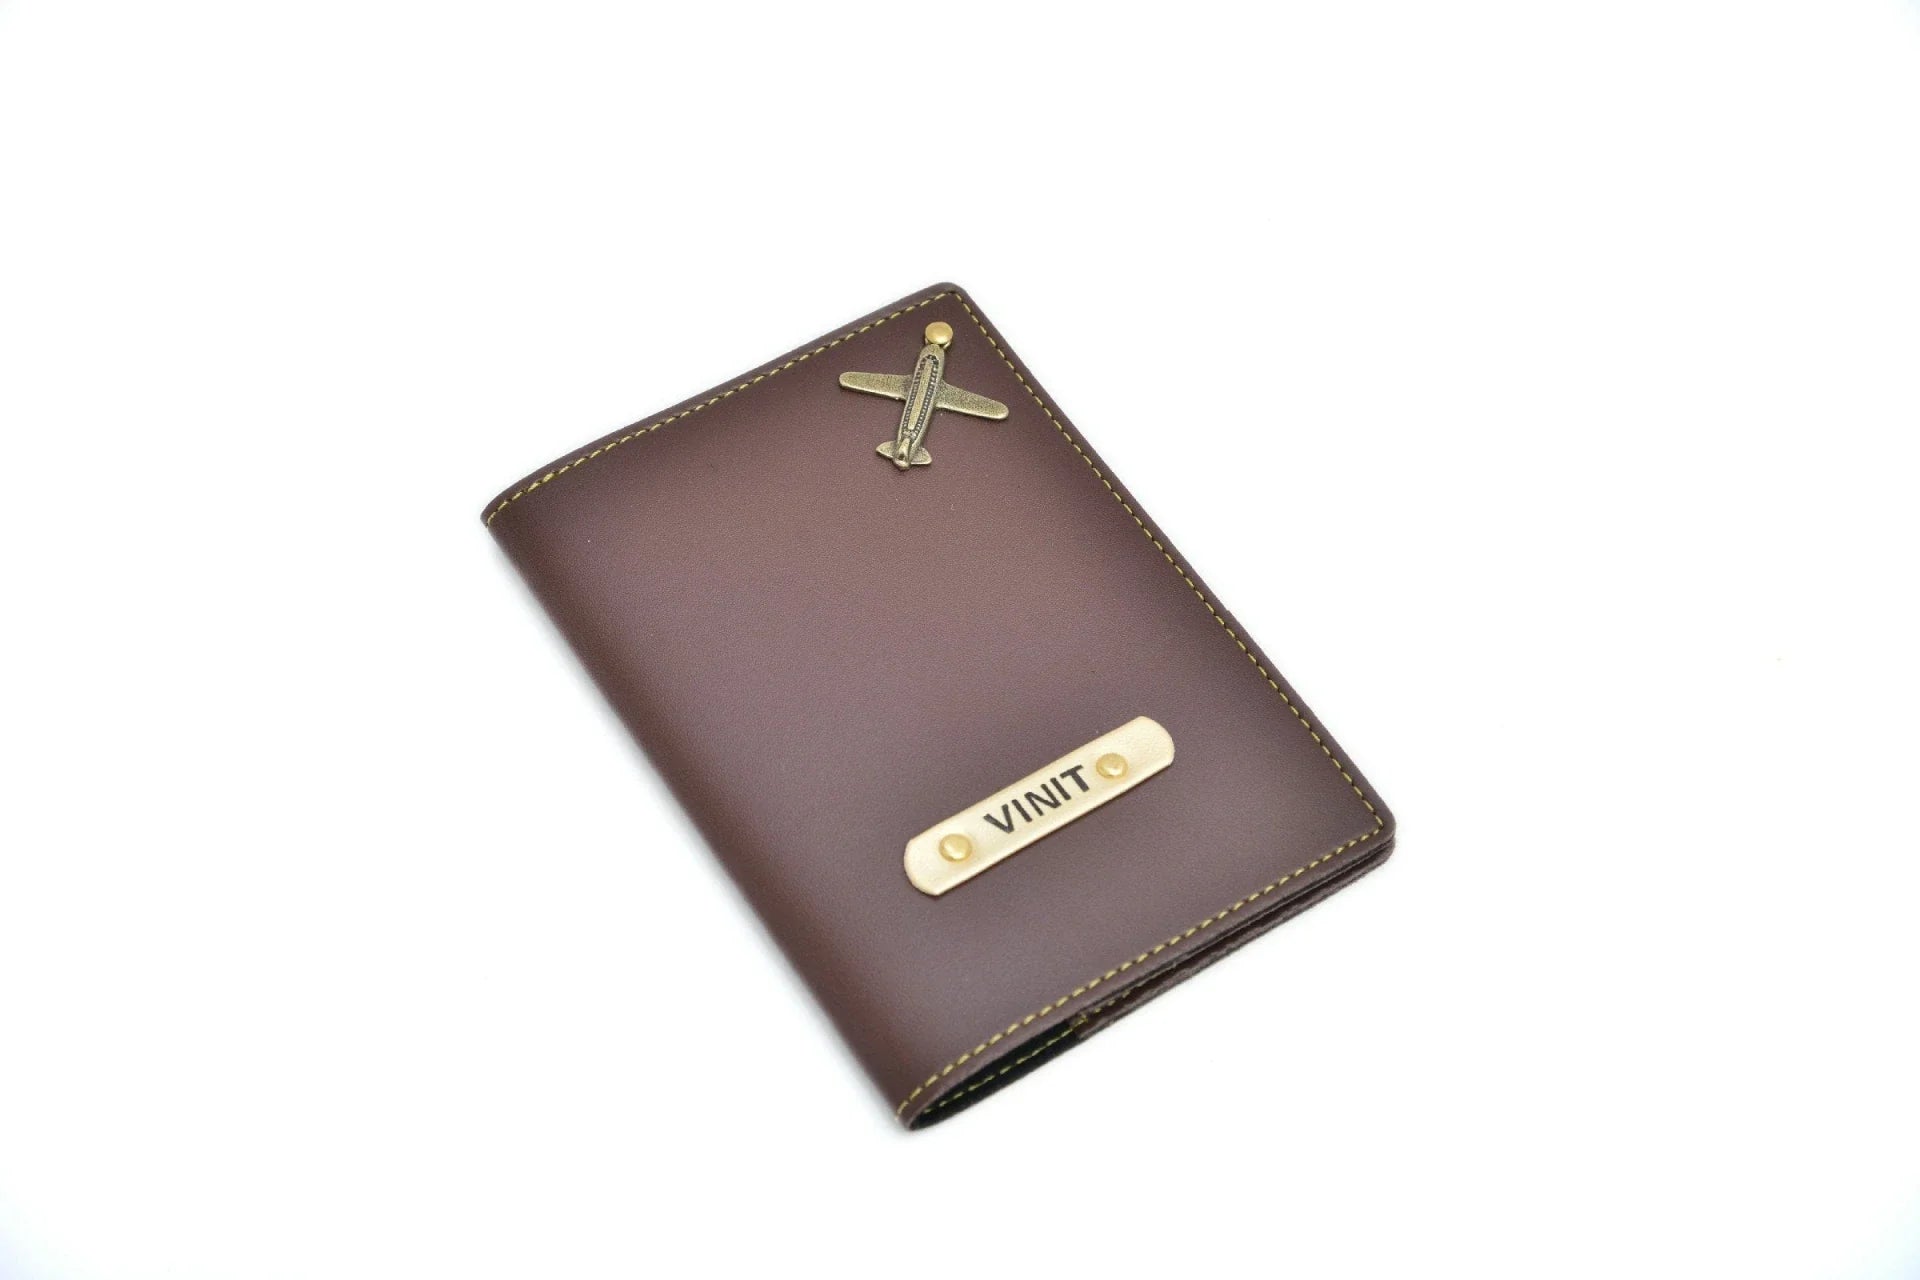 personalized-cb08-brown-customized-best-gift-for-boyfriend-girlfriend.A must-have travel accessory for today's minimalist traveler who seeks both style and function. With a personalized touch, it has your name and charm on it with its attractive finish.The case with its sturdy build ensures protection of your passport during traveling shenanigans! It carries your passport, money, cards etc. at one place. Material-vegan/synthetic leather